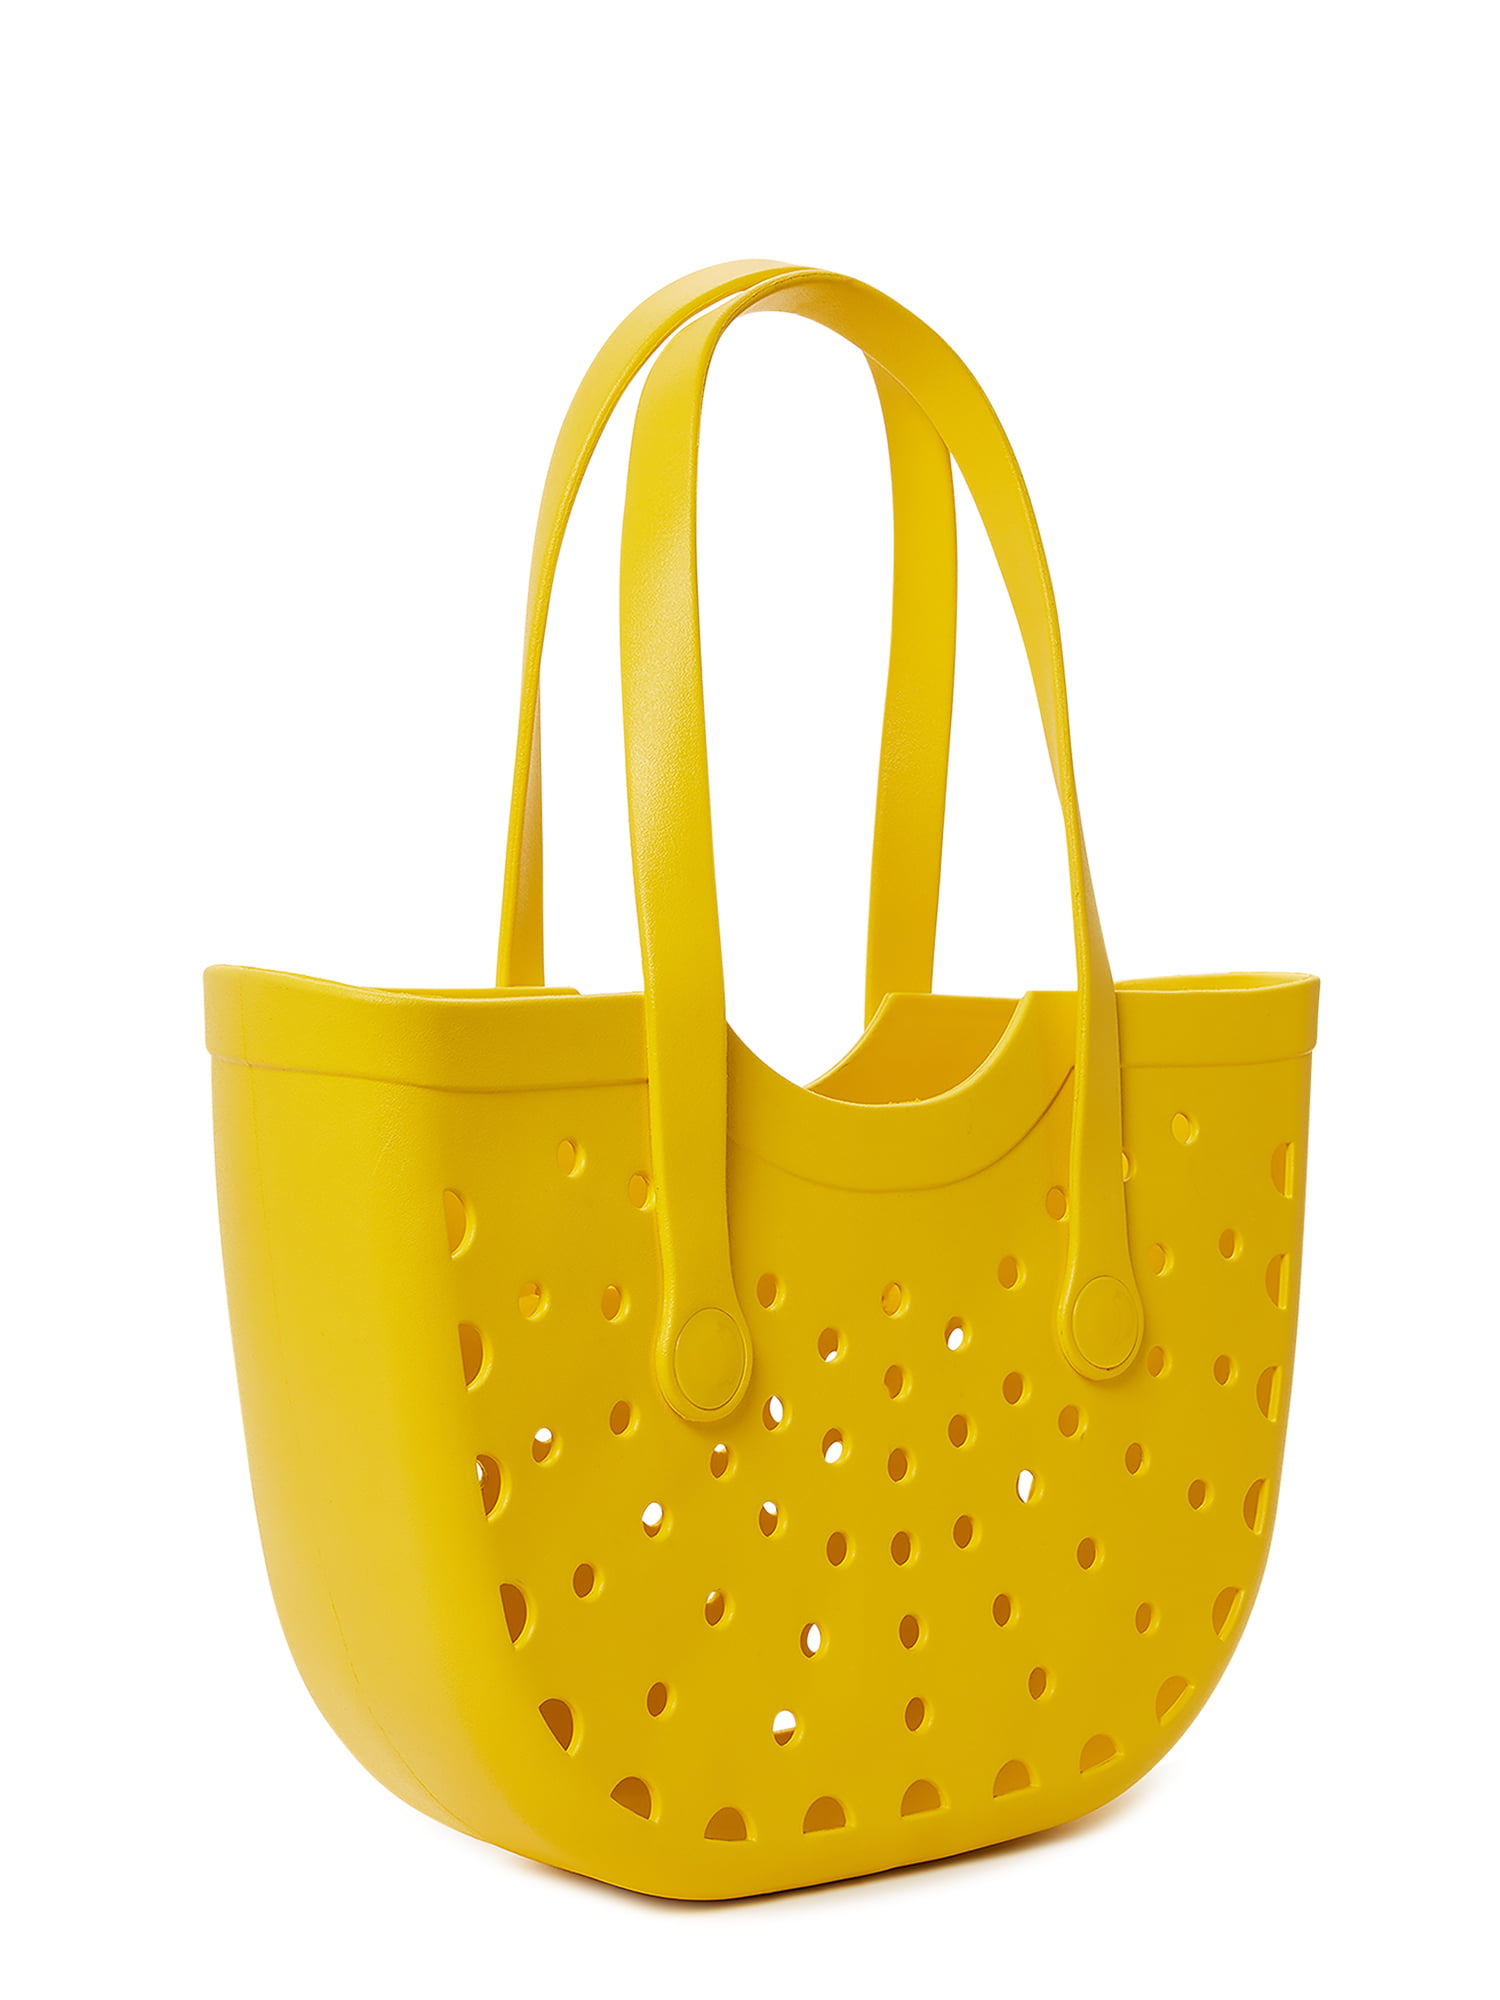 Rubber Beach Bag, LEDHOME Oversized Waterproof Tote Bags for Women  Sandproof Handbag Basket for Beach, Supermarket (Yellow,Large (15 * 14 *  5.5 inch))